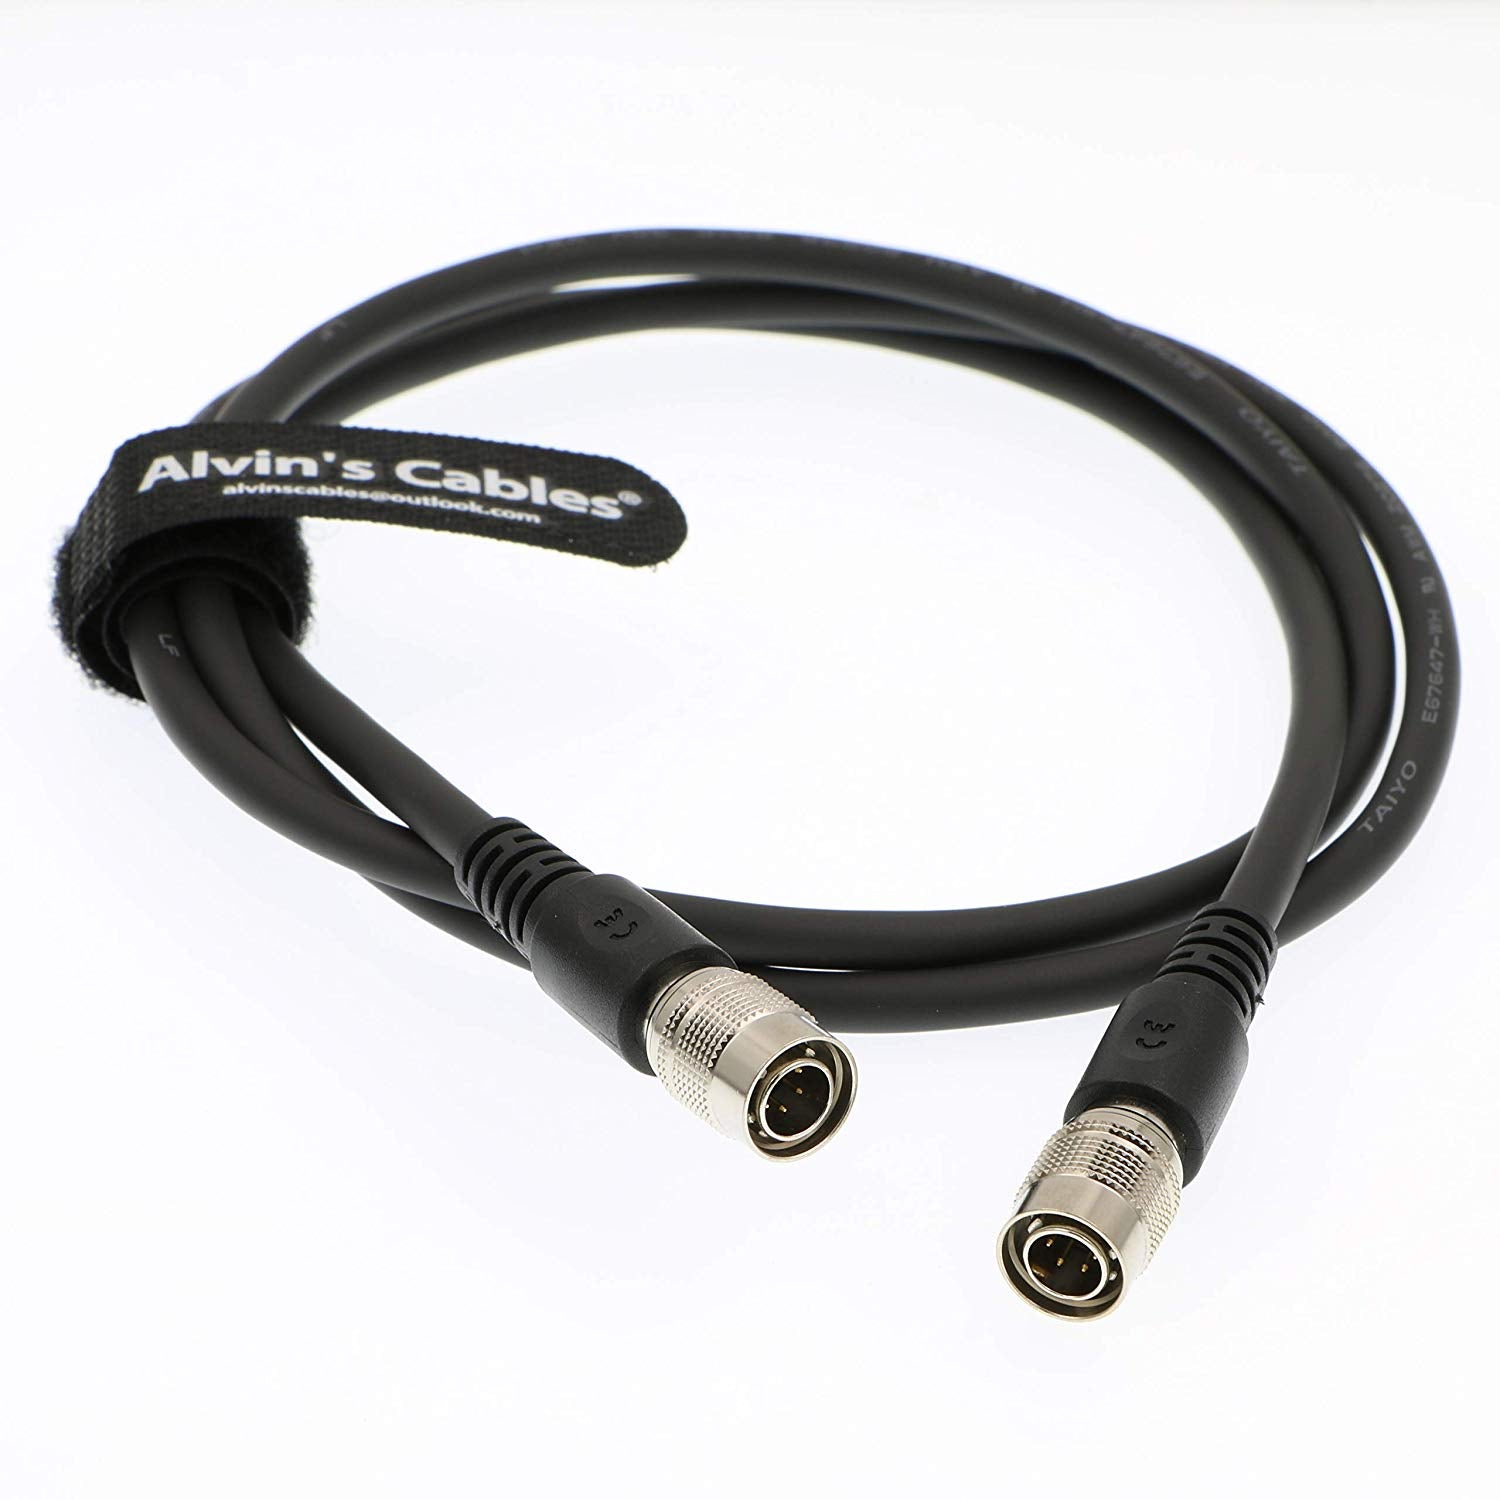 Alvin's Cables 6 Pin Hirose Male to 6 Pin Hirose Male Cable 80CM  1m